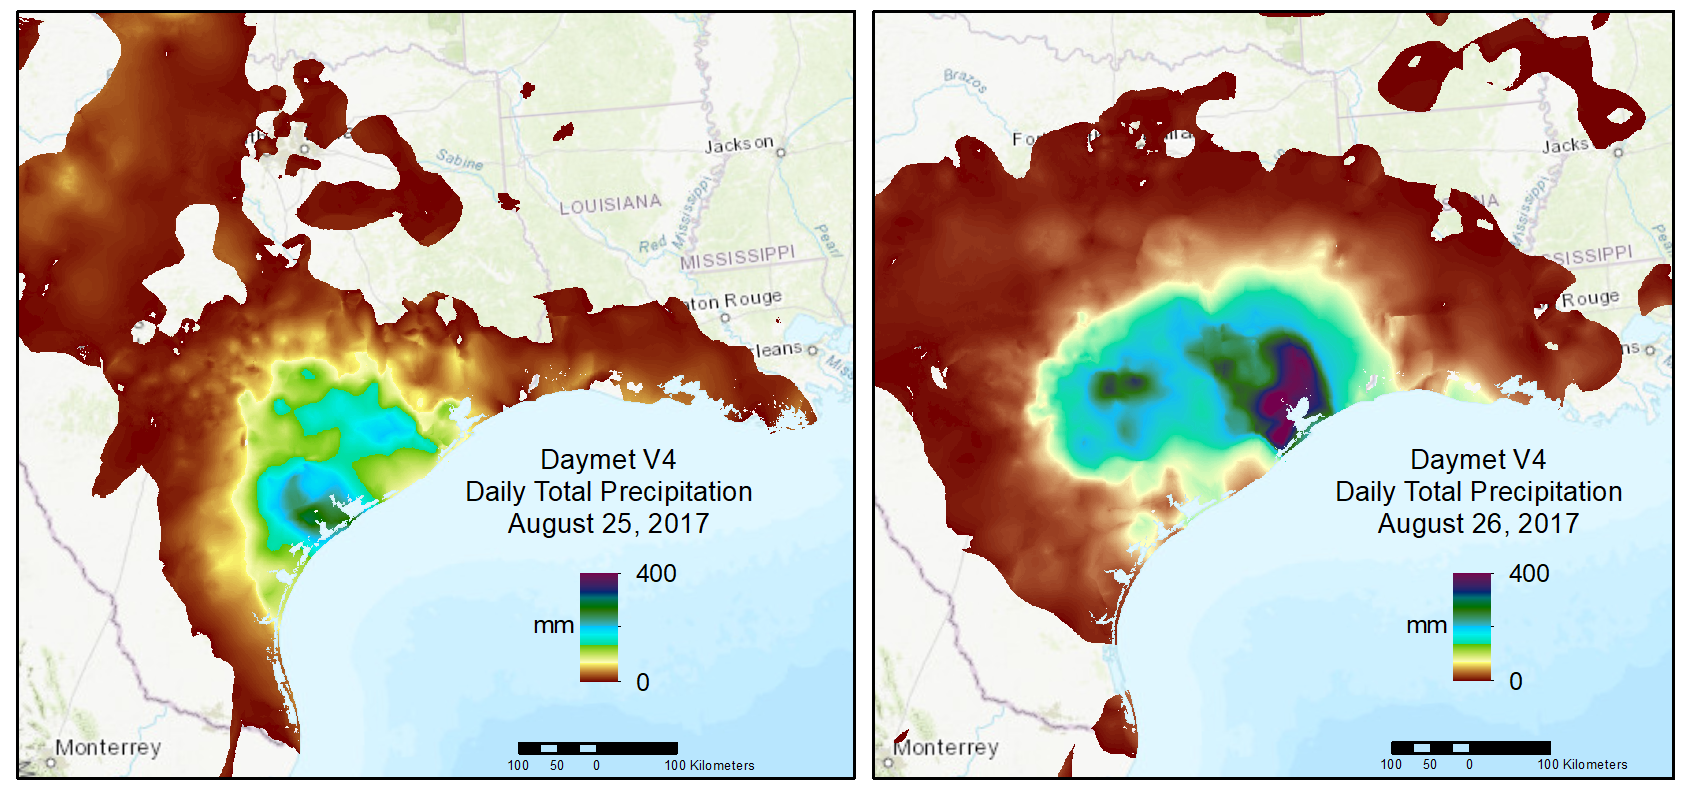 This graphic shows Daymet data pertaining to daily precipitation amounts in southeast Texas during Hurricane Harvey in on August 25 and 26, 2017.2017